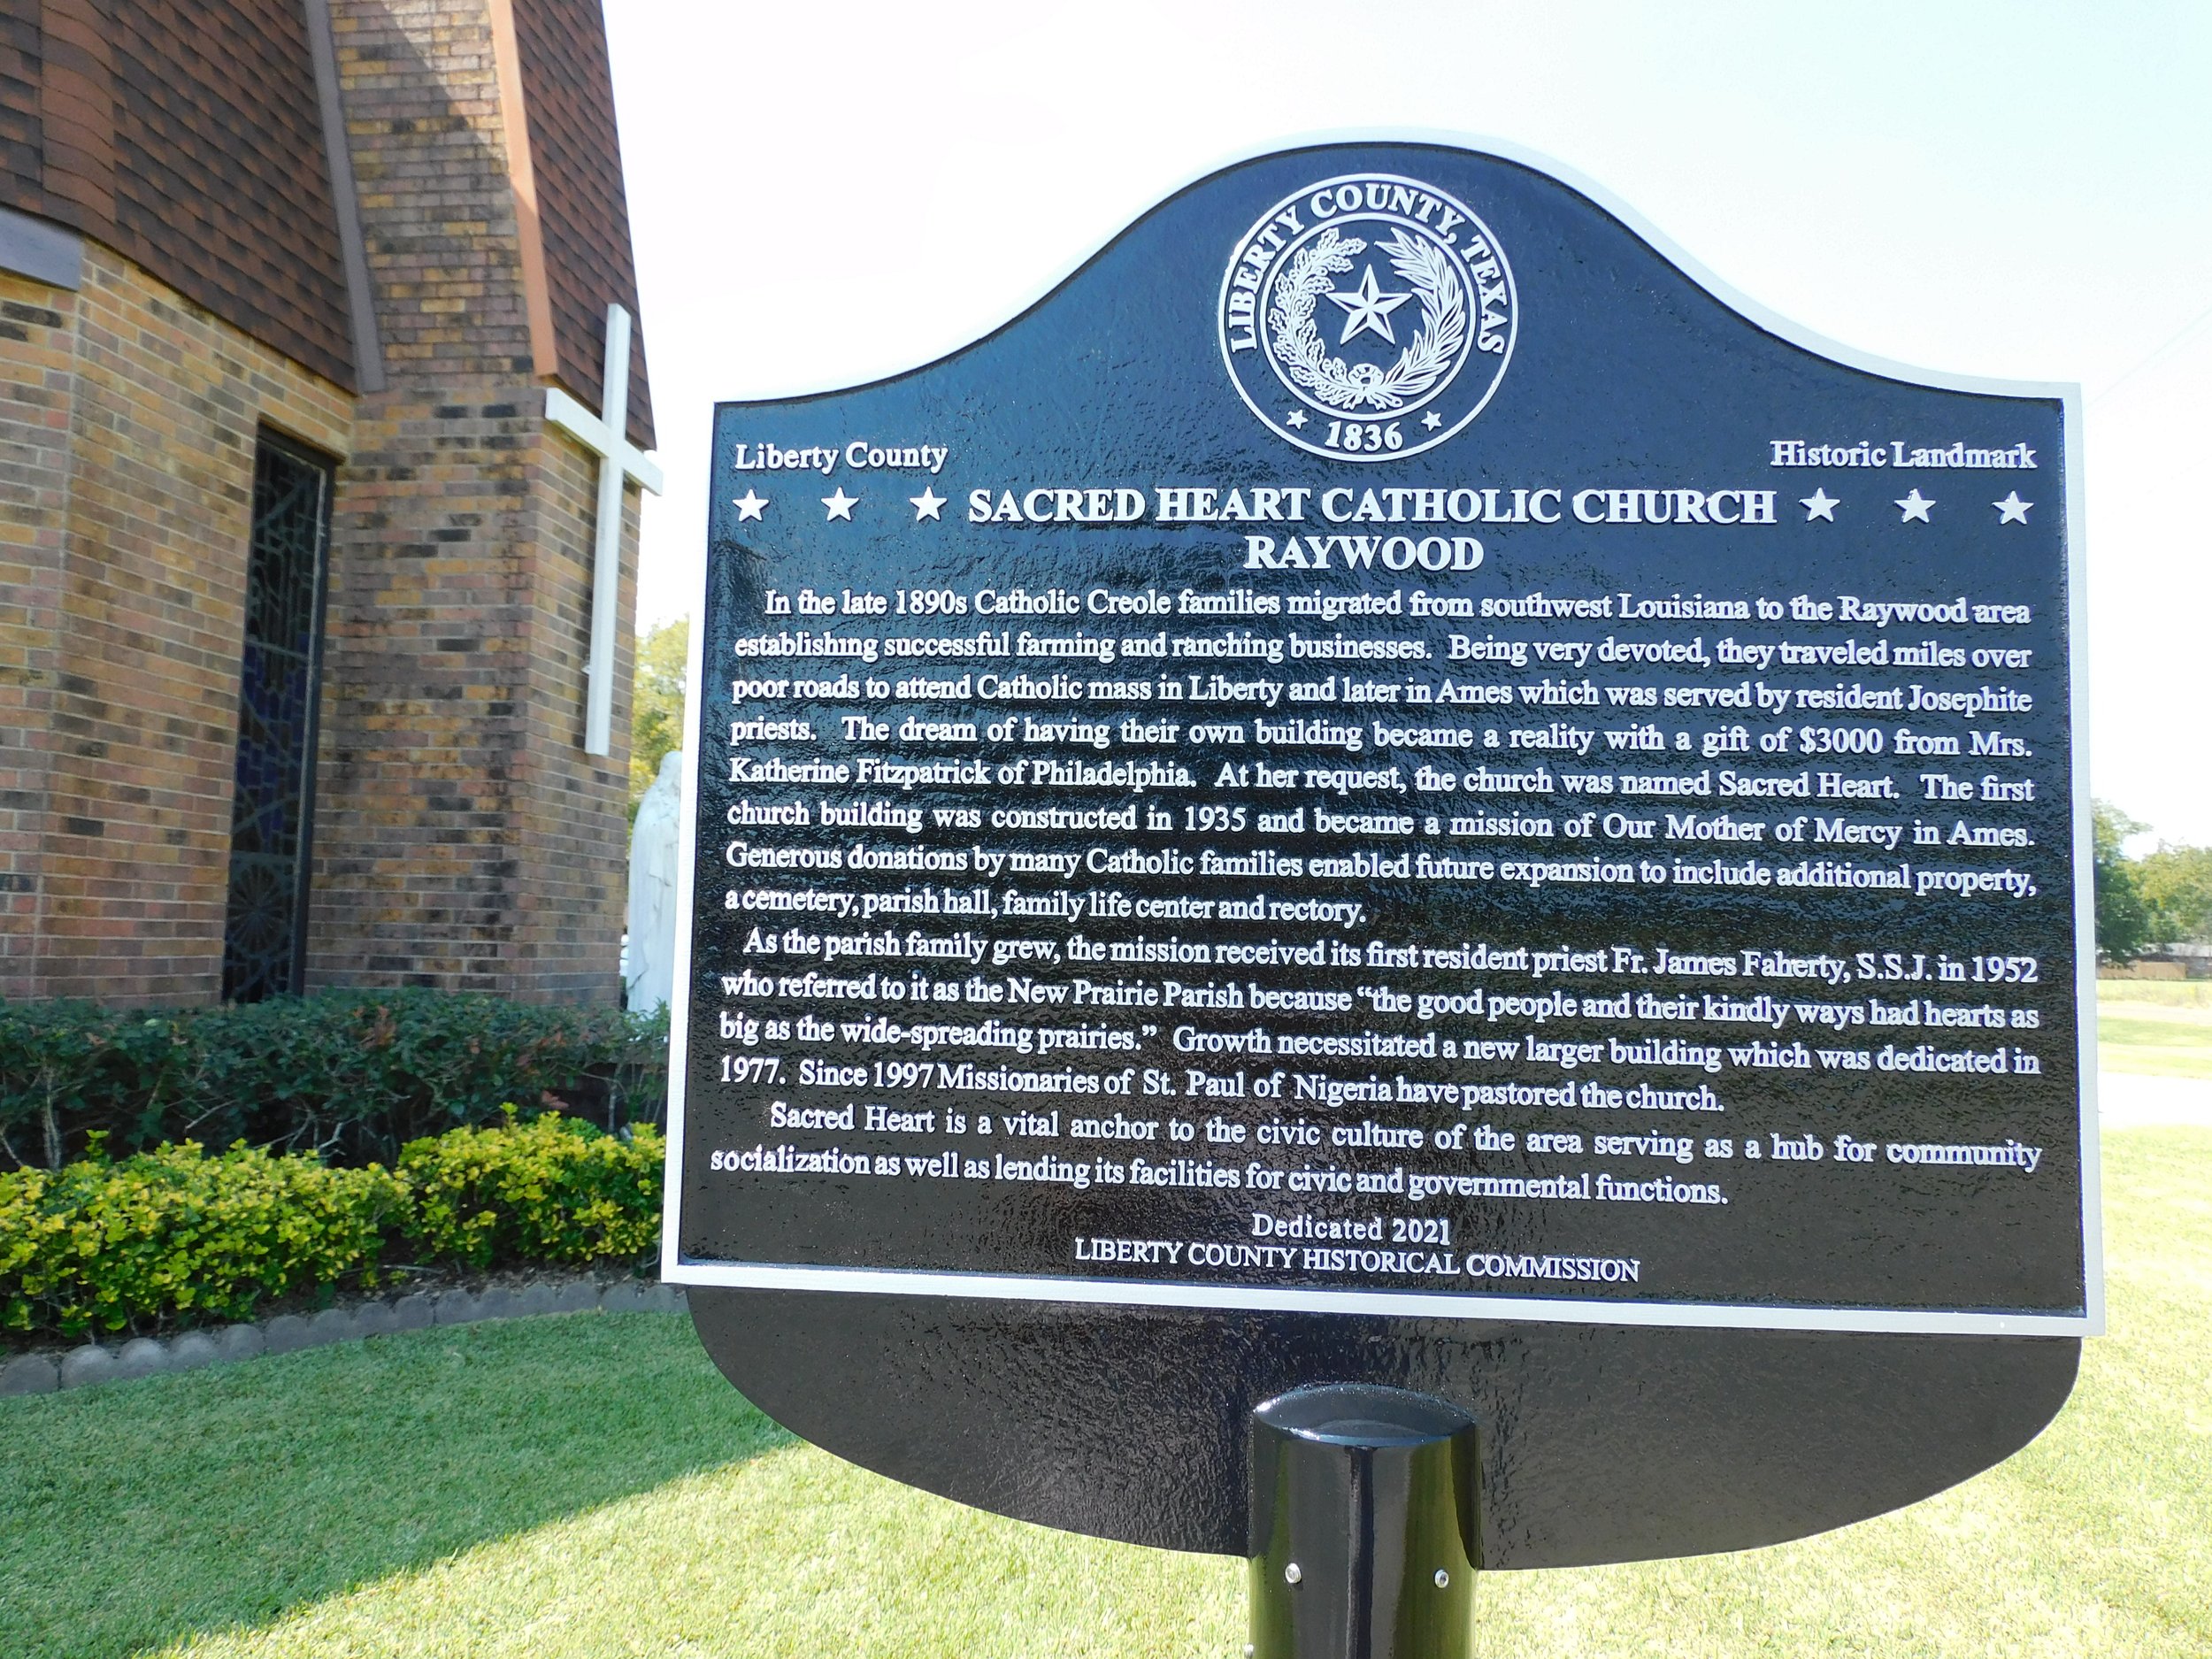  After years of work by many, the historical marker is now in place. 